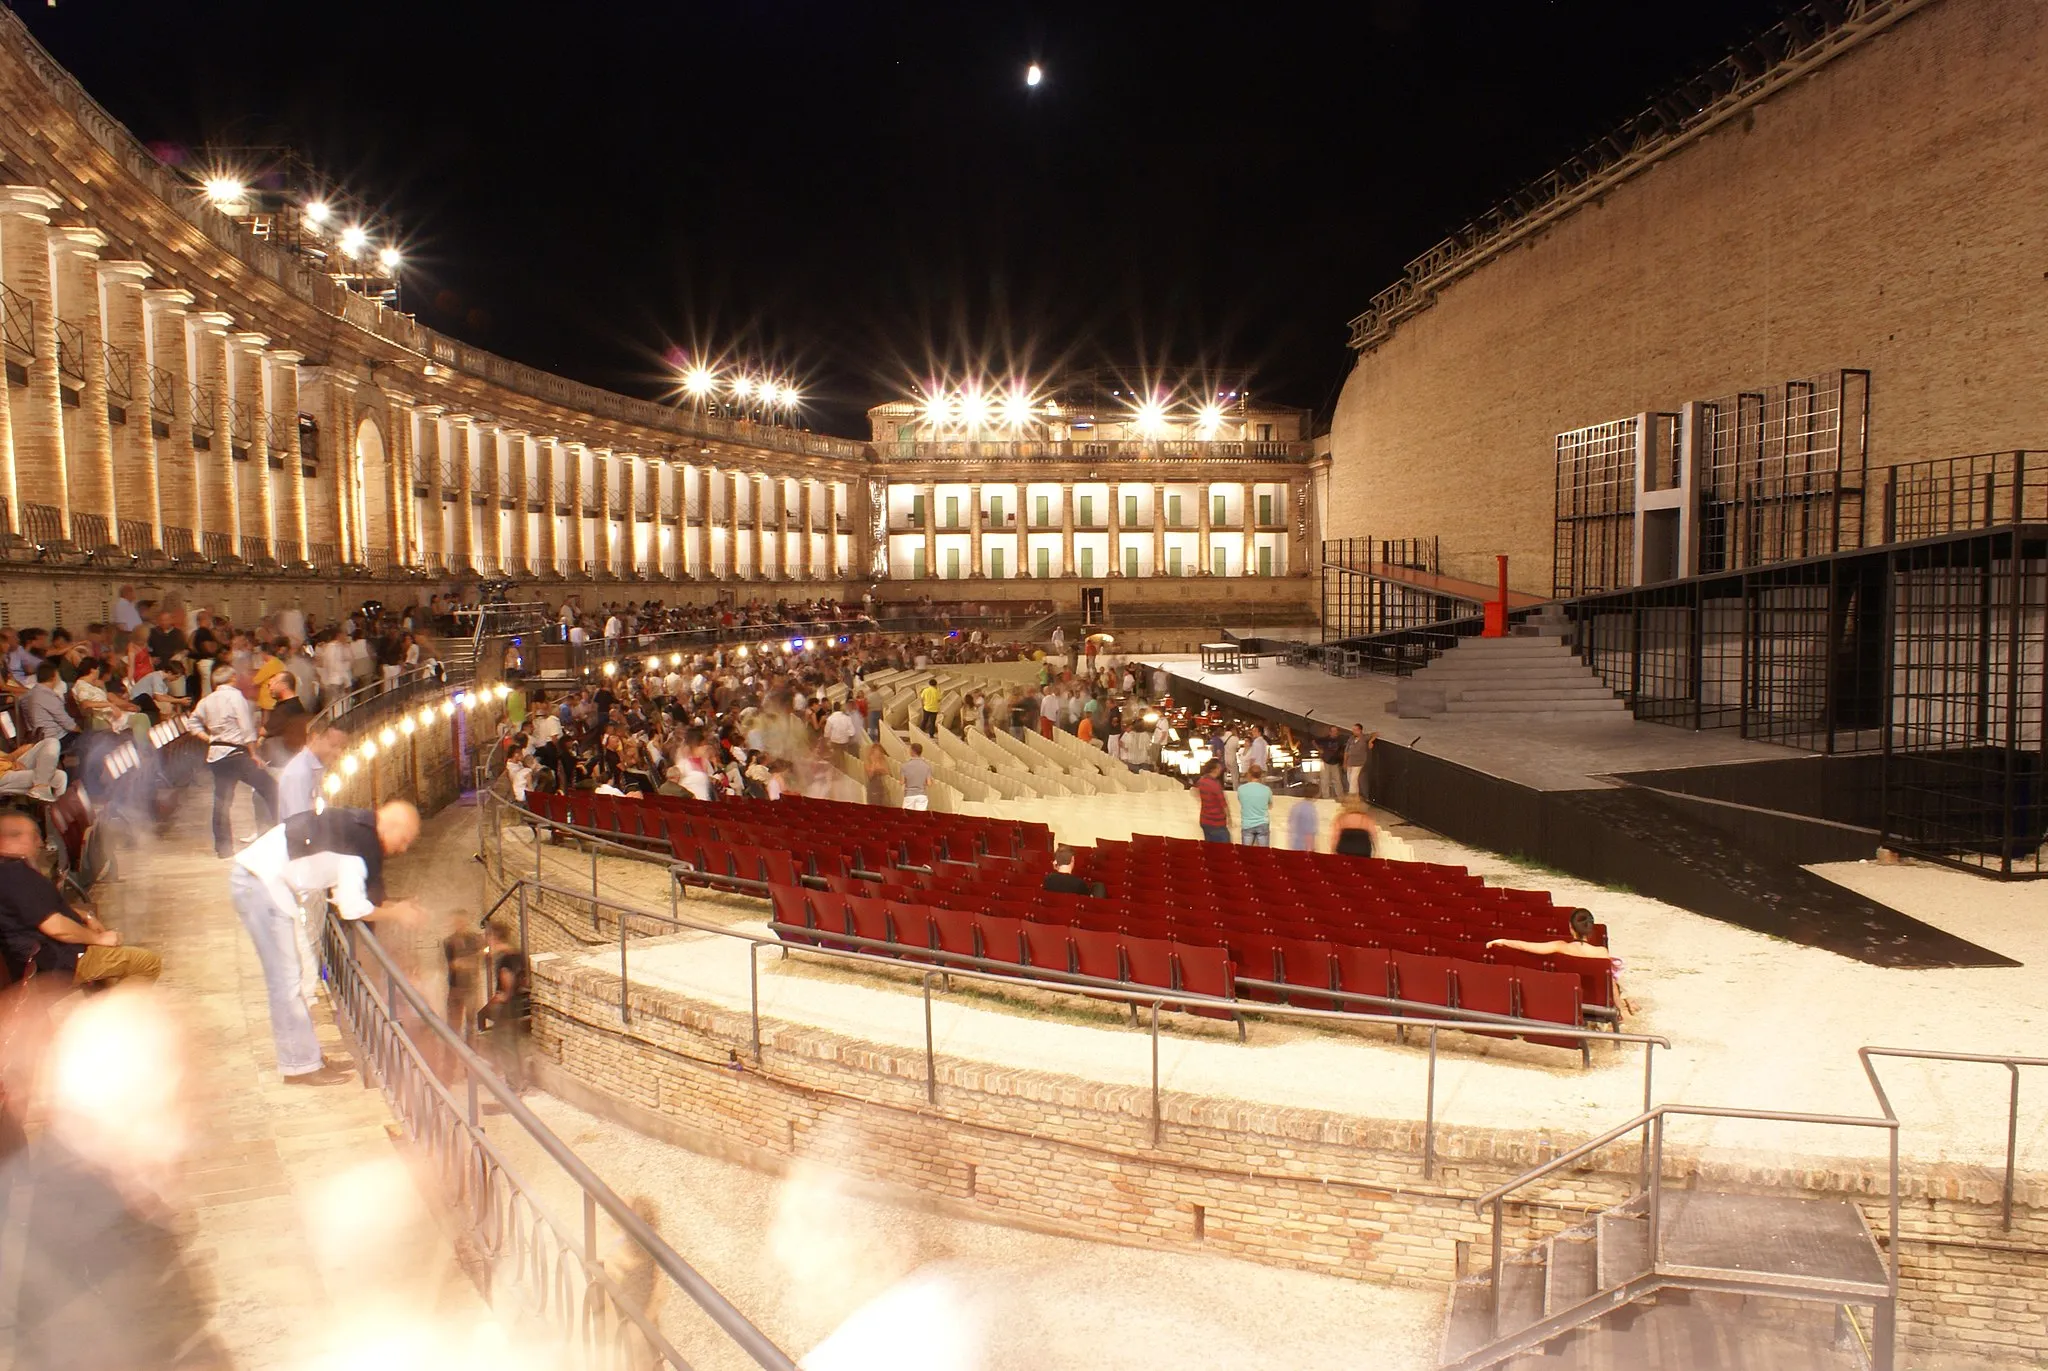 Photo showing: The Sferisterio in Macerata, a large open-air theatre erected from 1820 to 1829 as a playing field for a local ball game, now houses a yearly opera festival in the summer. Its website can be found at [1]. Here, the Sferisterio is shown two nights before the Premiere of the summer 2007 opera festival. The dress rehearsal of "Macbeth" is about to start.